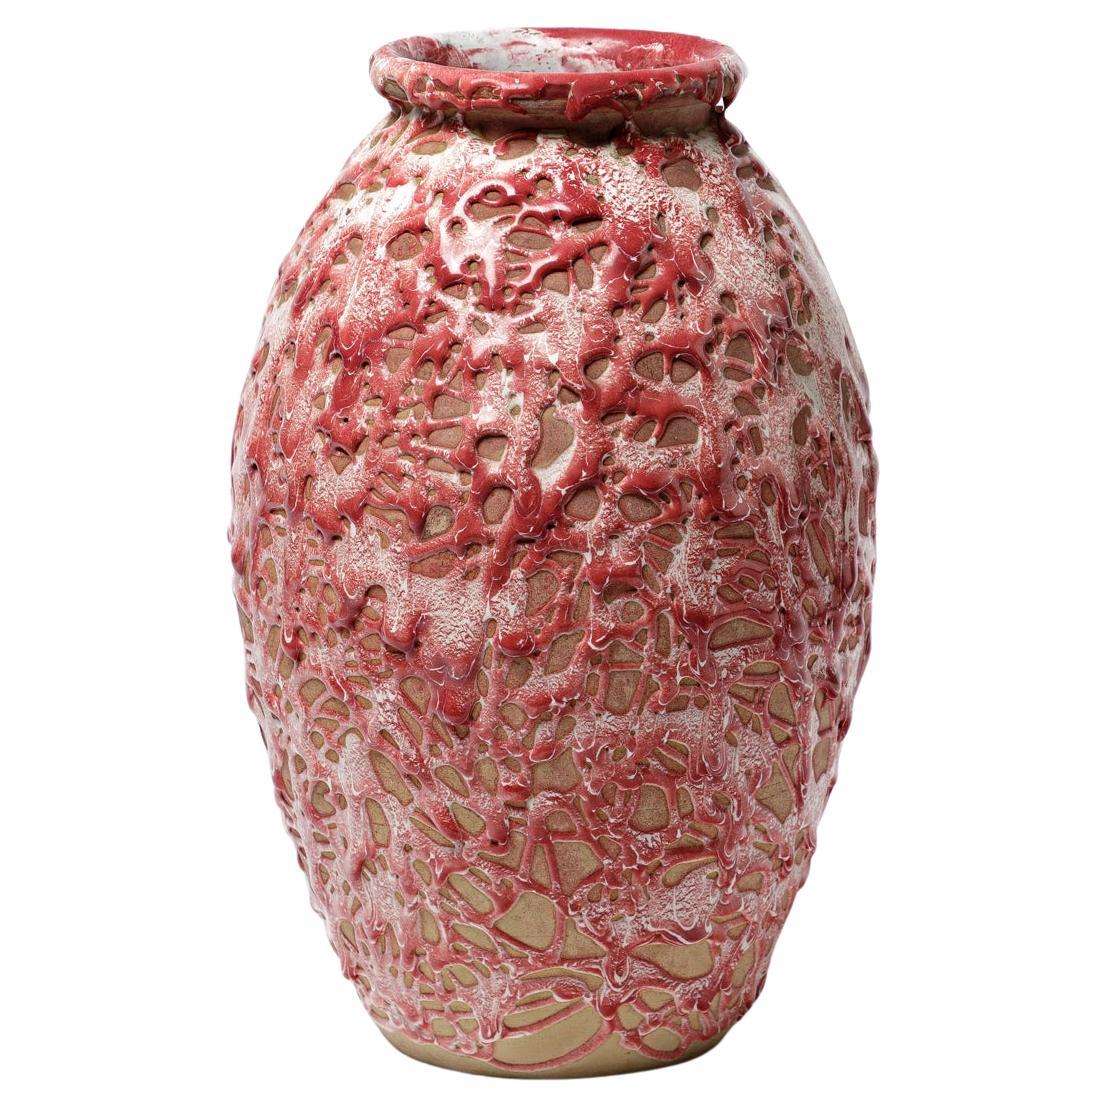 A ceramic vase with pink glaze decoration, circa 1930 attributed to CAB.